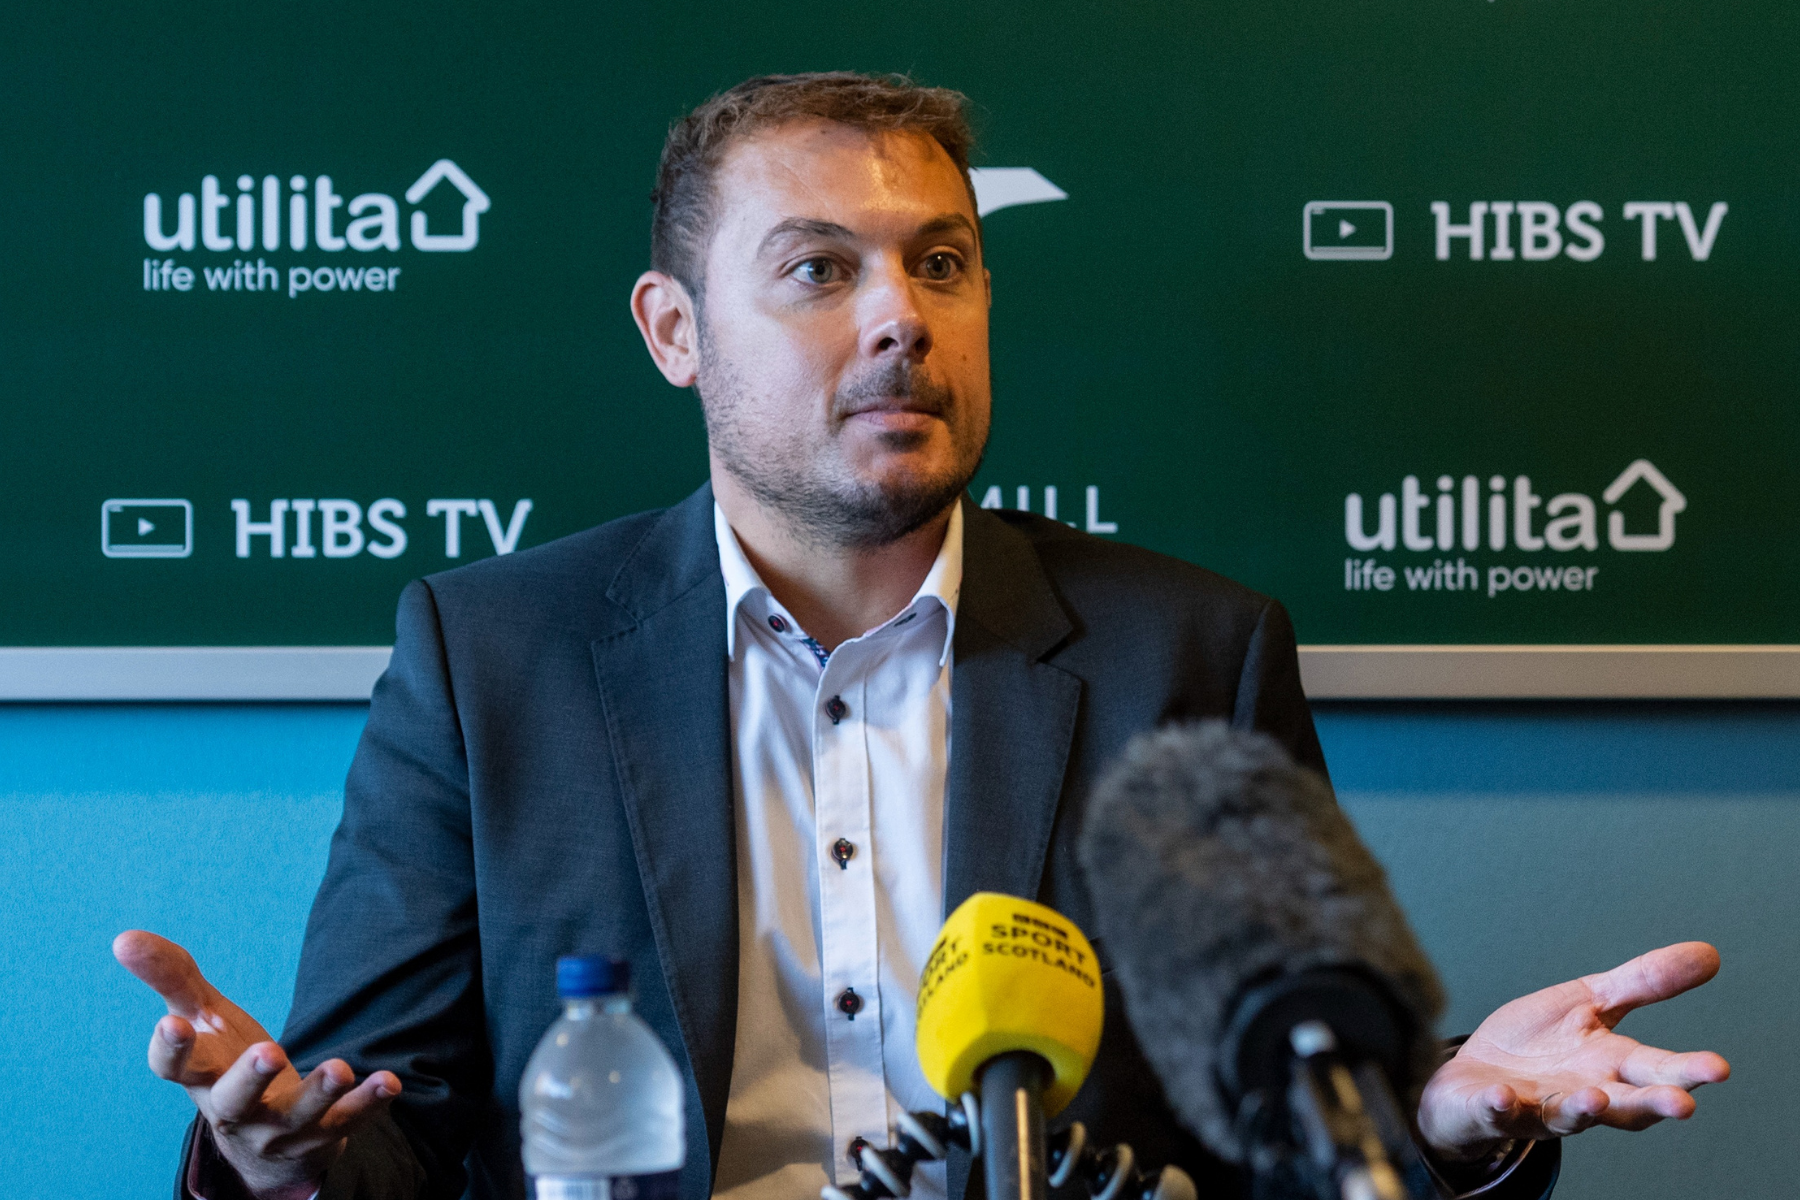 Hibs Covid breach allegations came from 'blue half of Glasgow', claims Ben Kensell